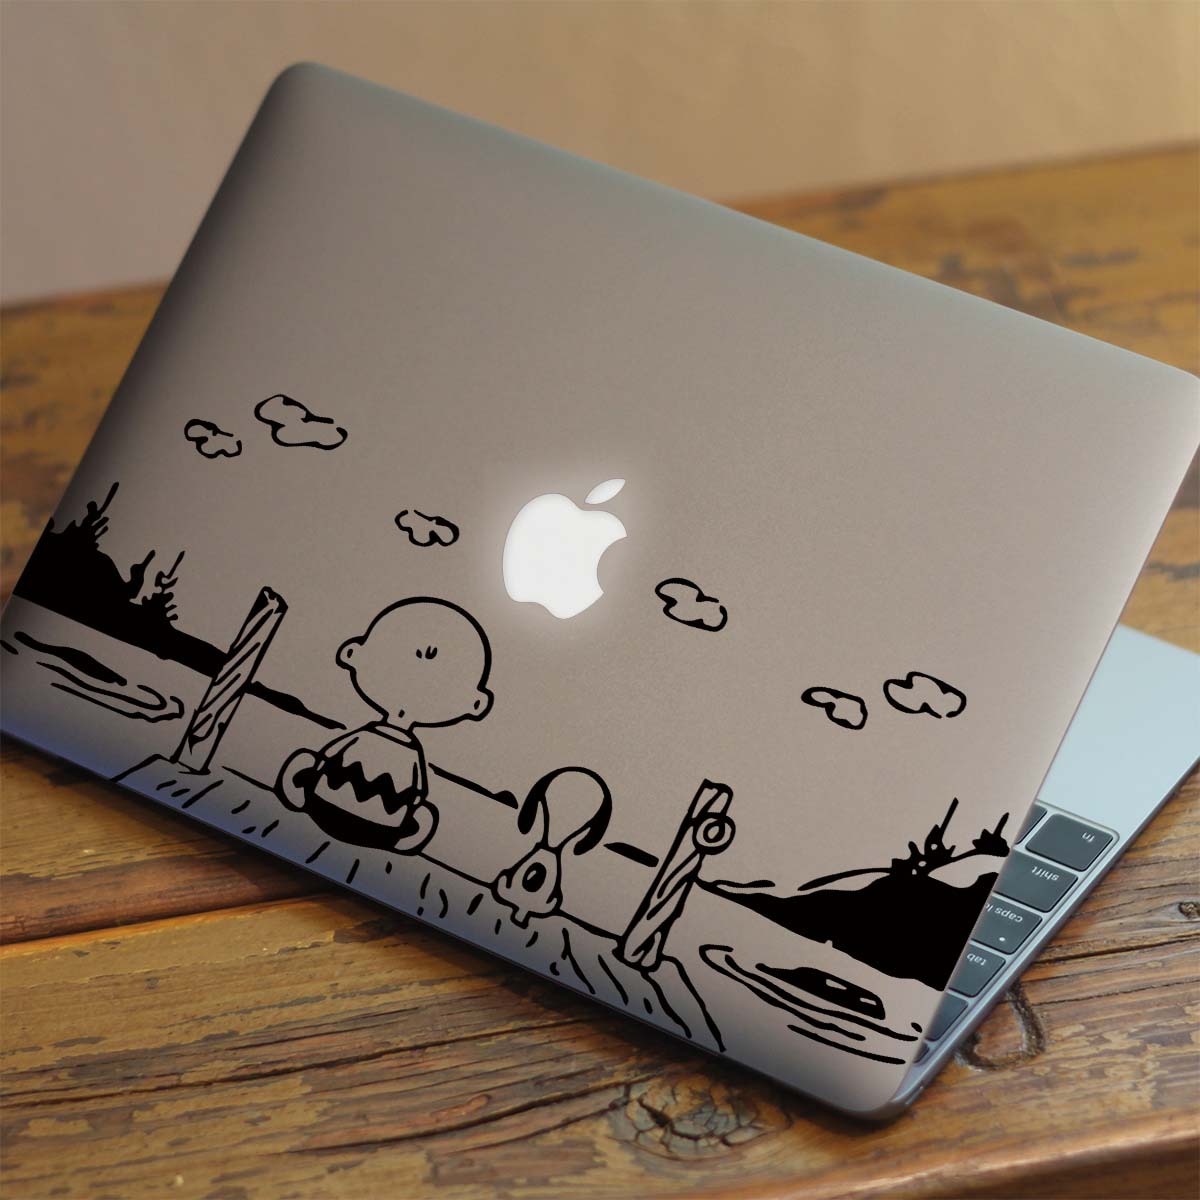 Snoopy & Charlie Brown Sunset MacBook Decal